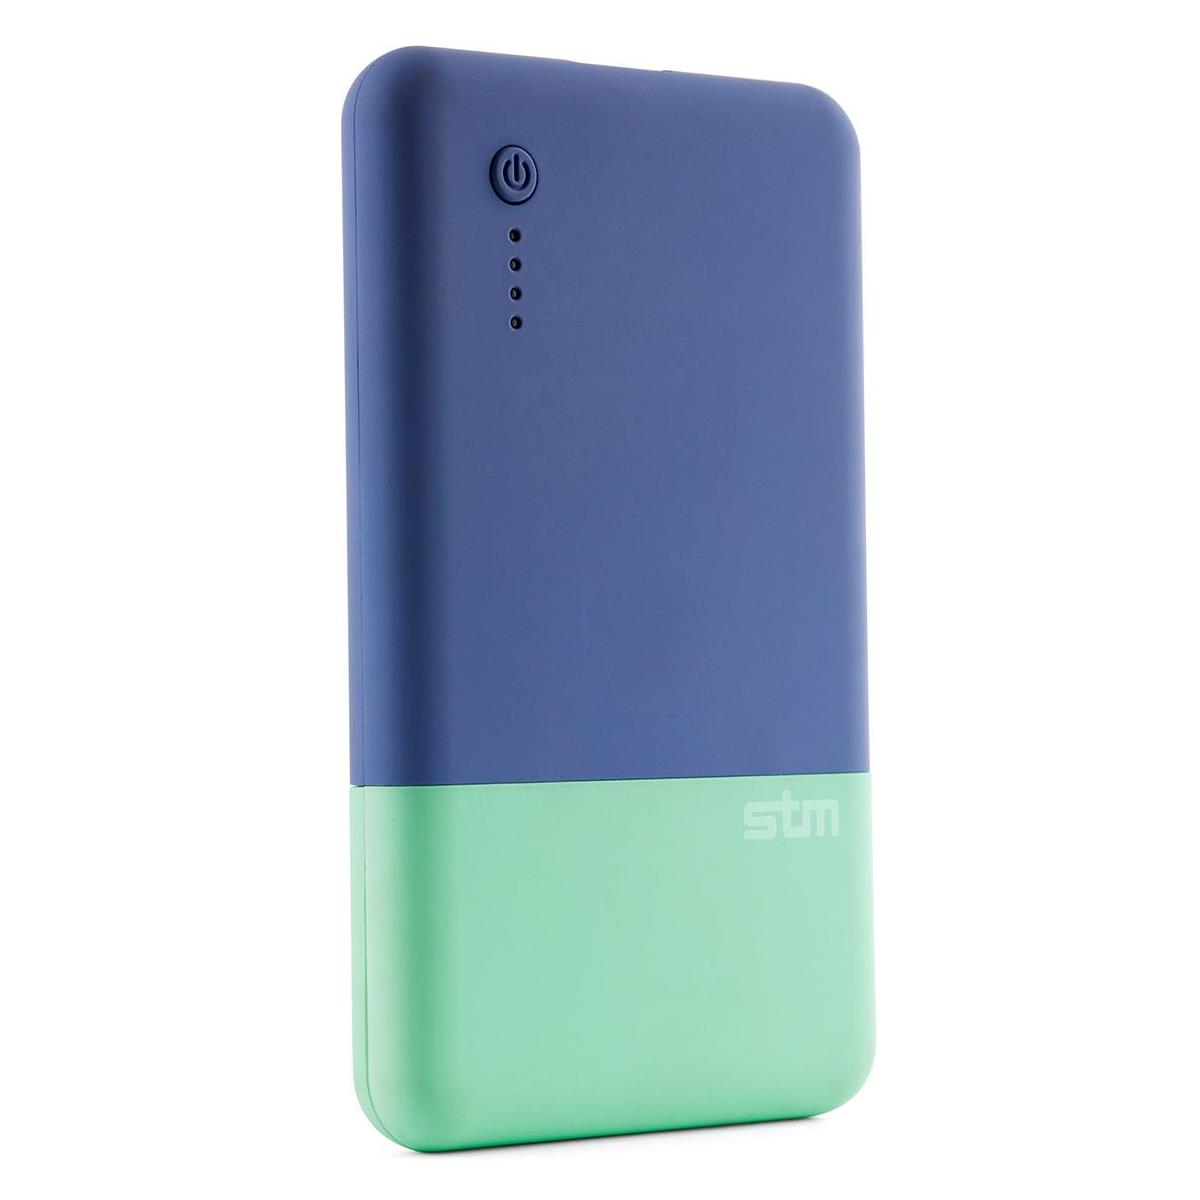 Image of STM Grace PowerBank 5000mAh Charger